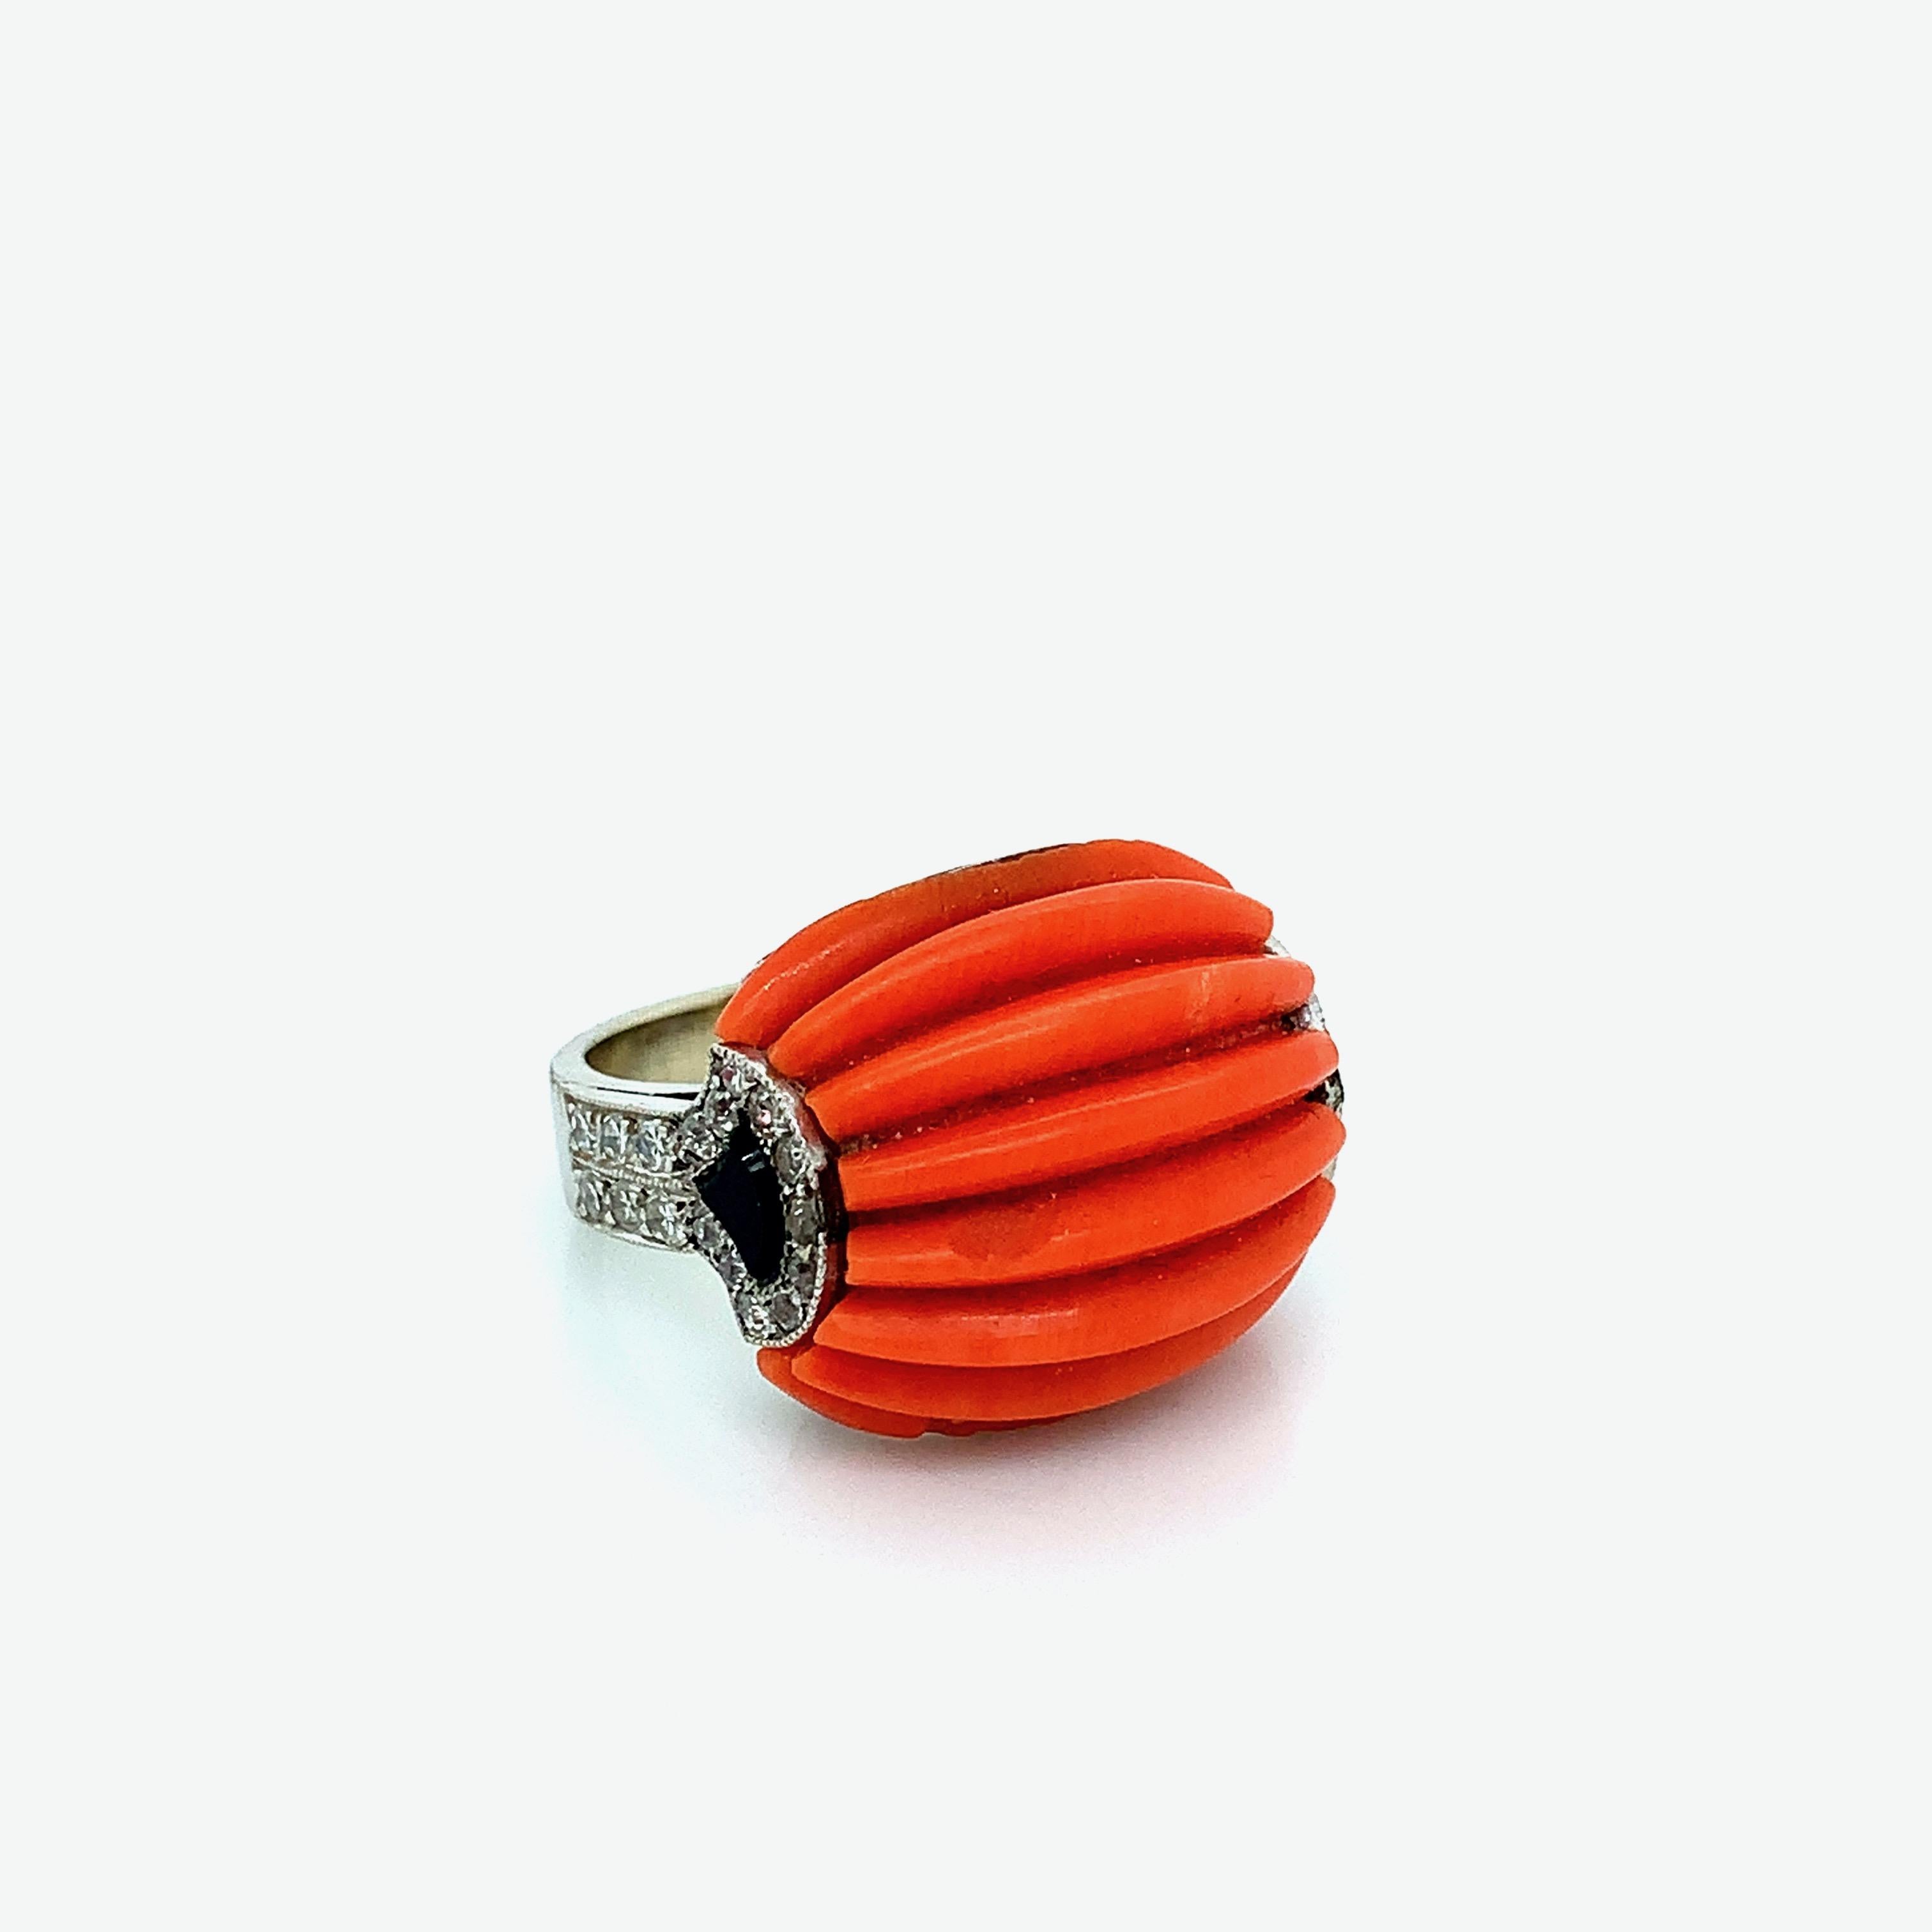 An art deco diamond coral ring. Made in Roma. Total weight: 9.9 grams. Size 6.